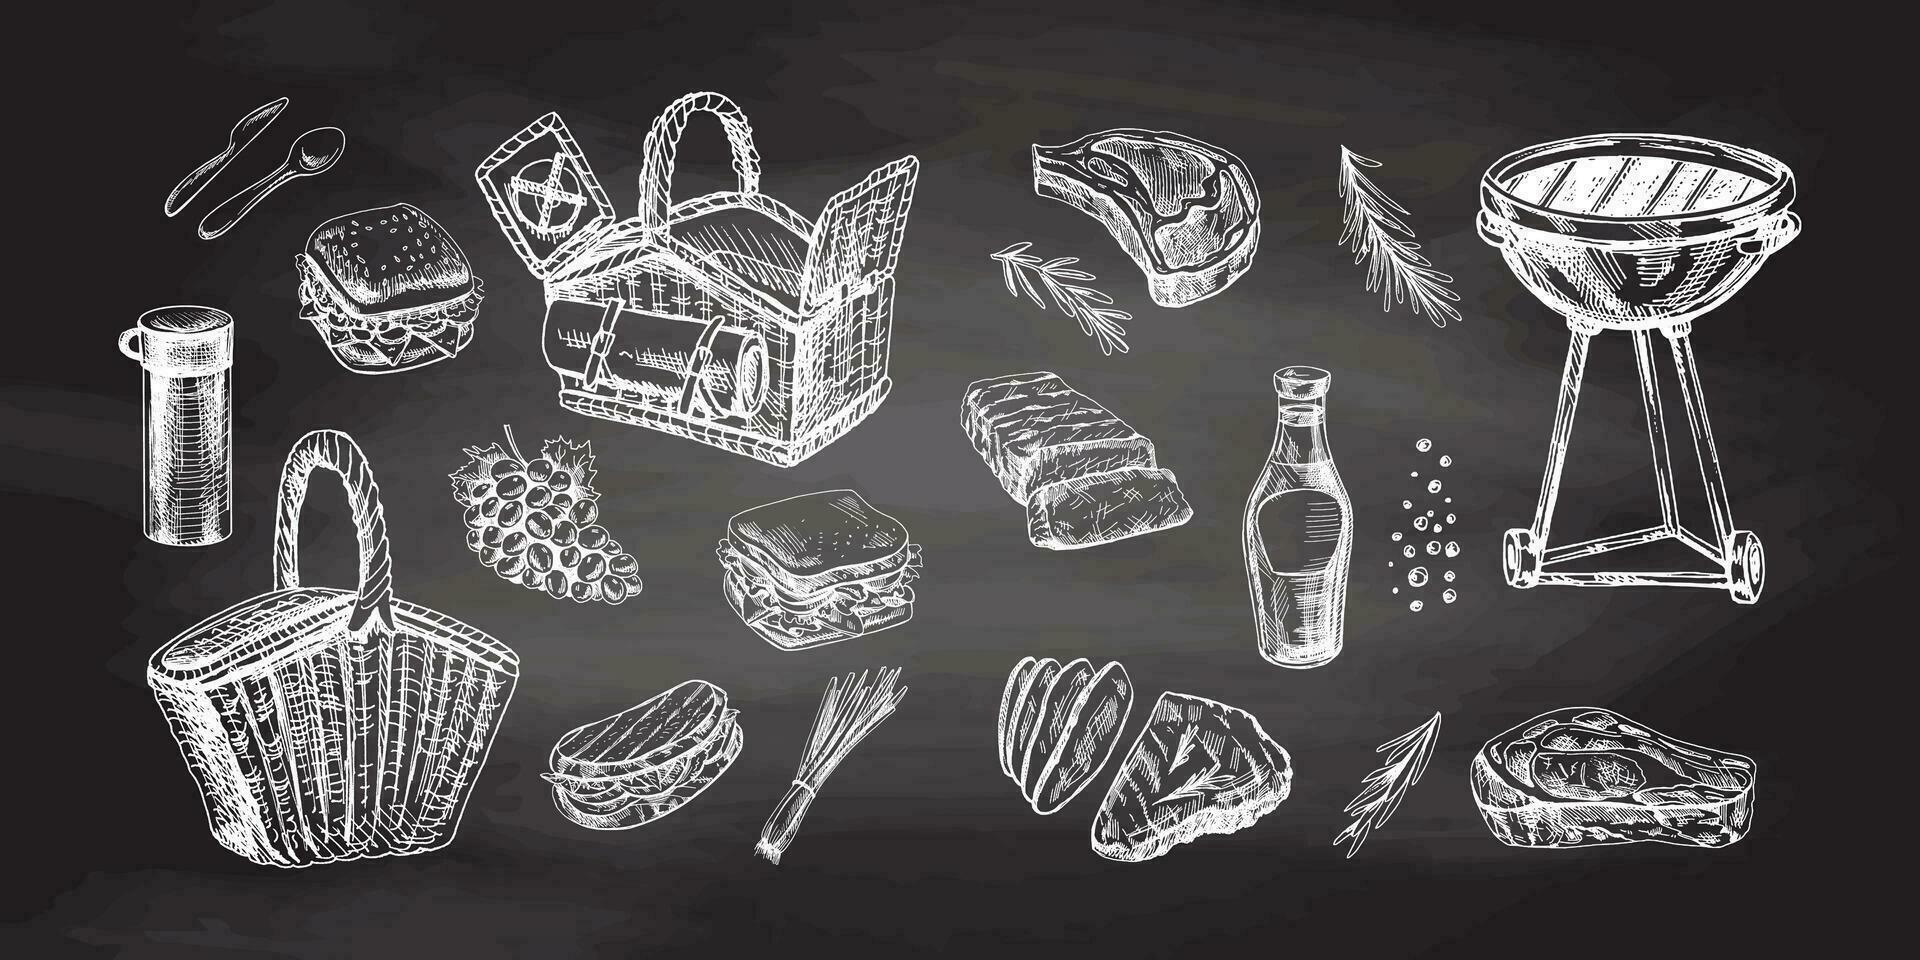 A set of hand-drawn sketches of barbecue and picnic elements on chalkboard background. Doodle vintage illustration. Engraved image. vector